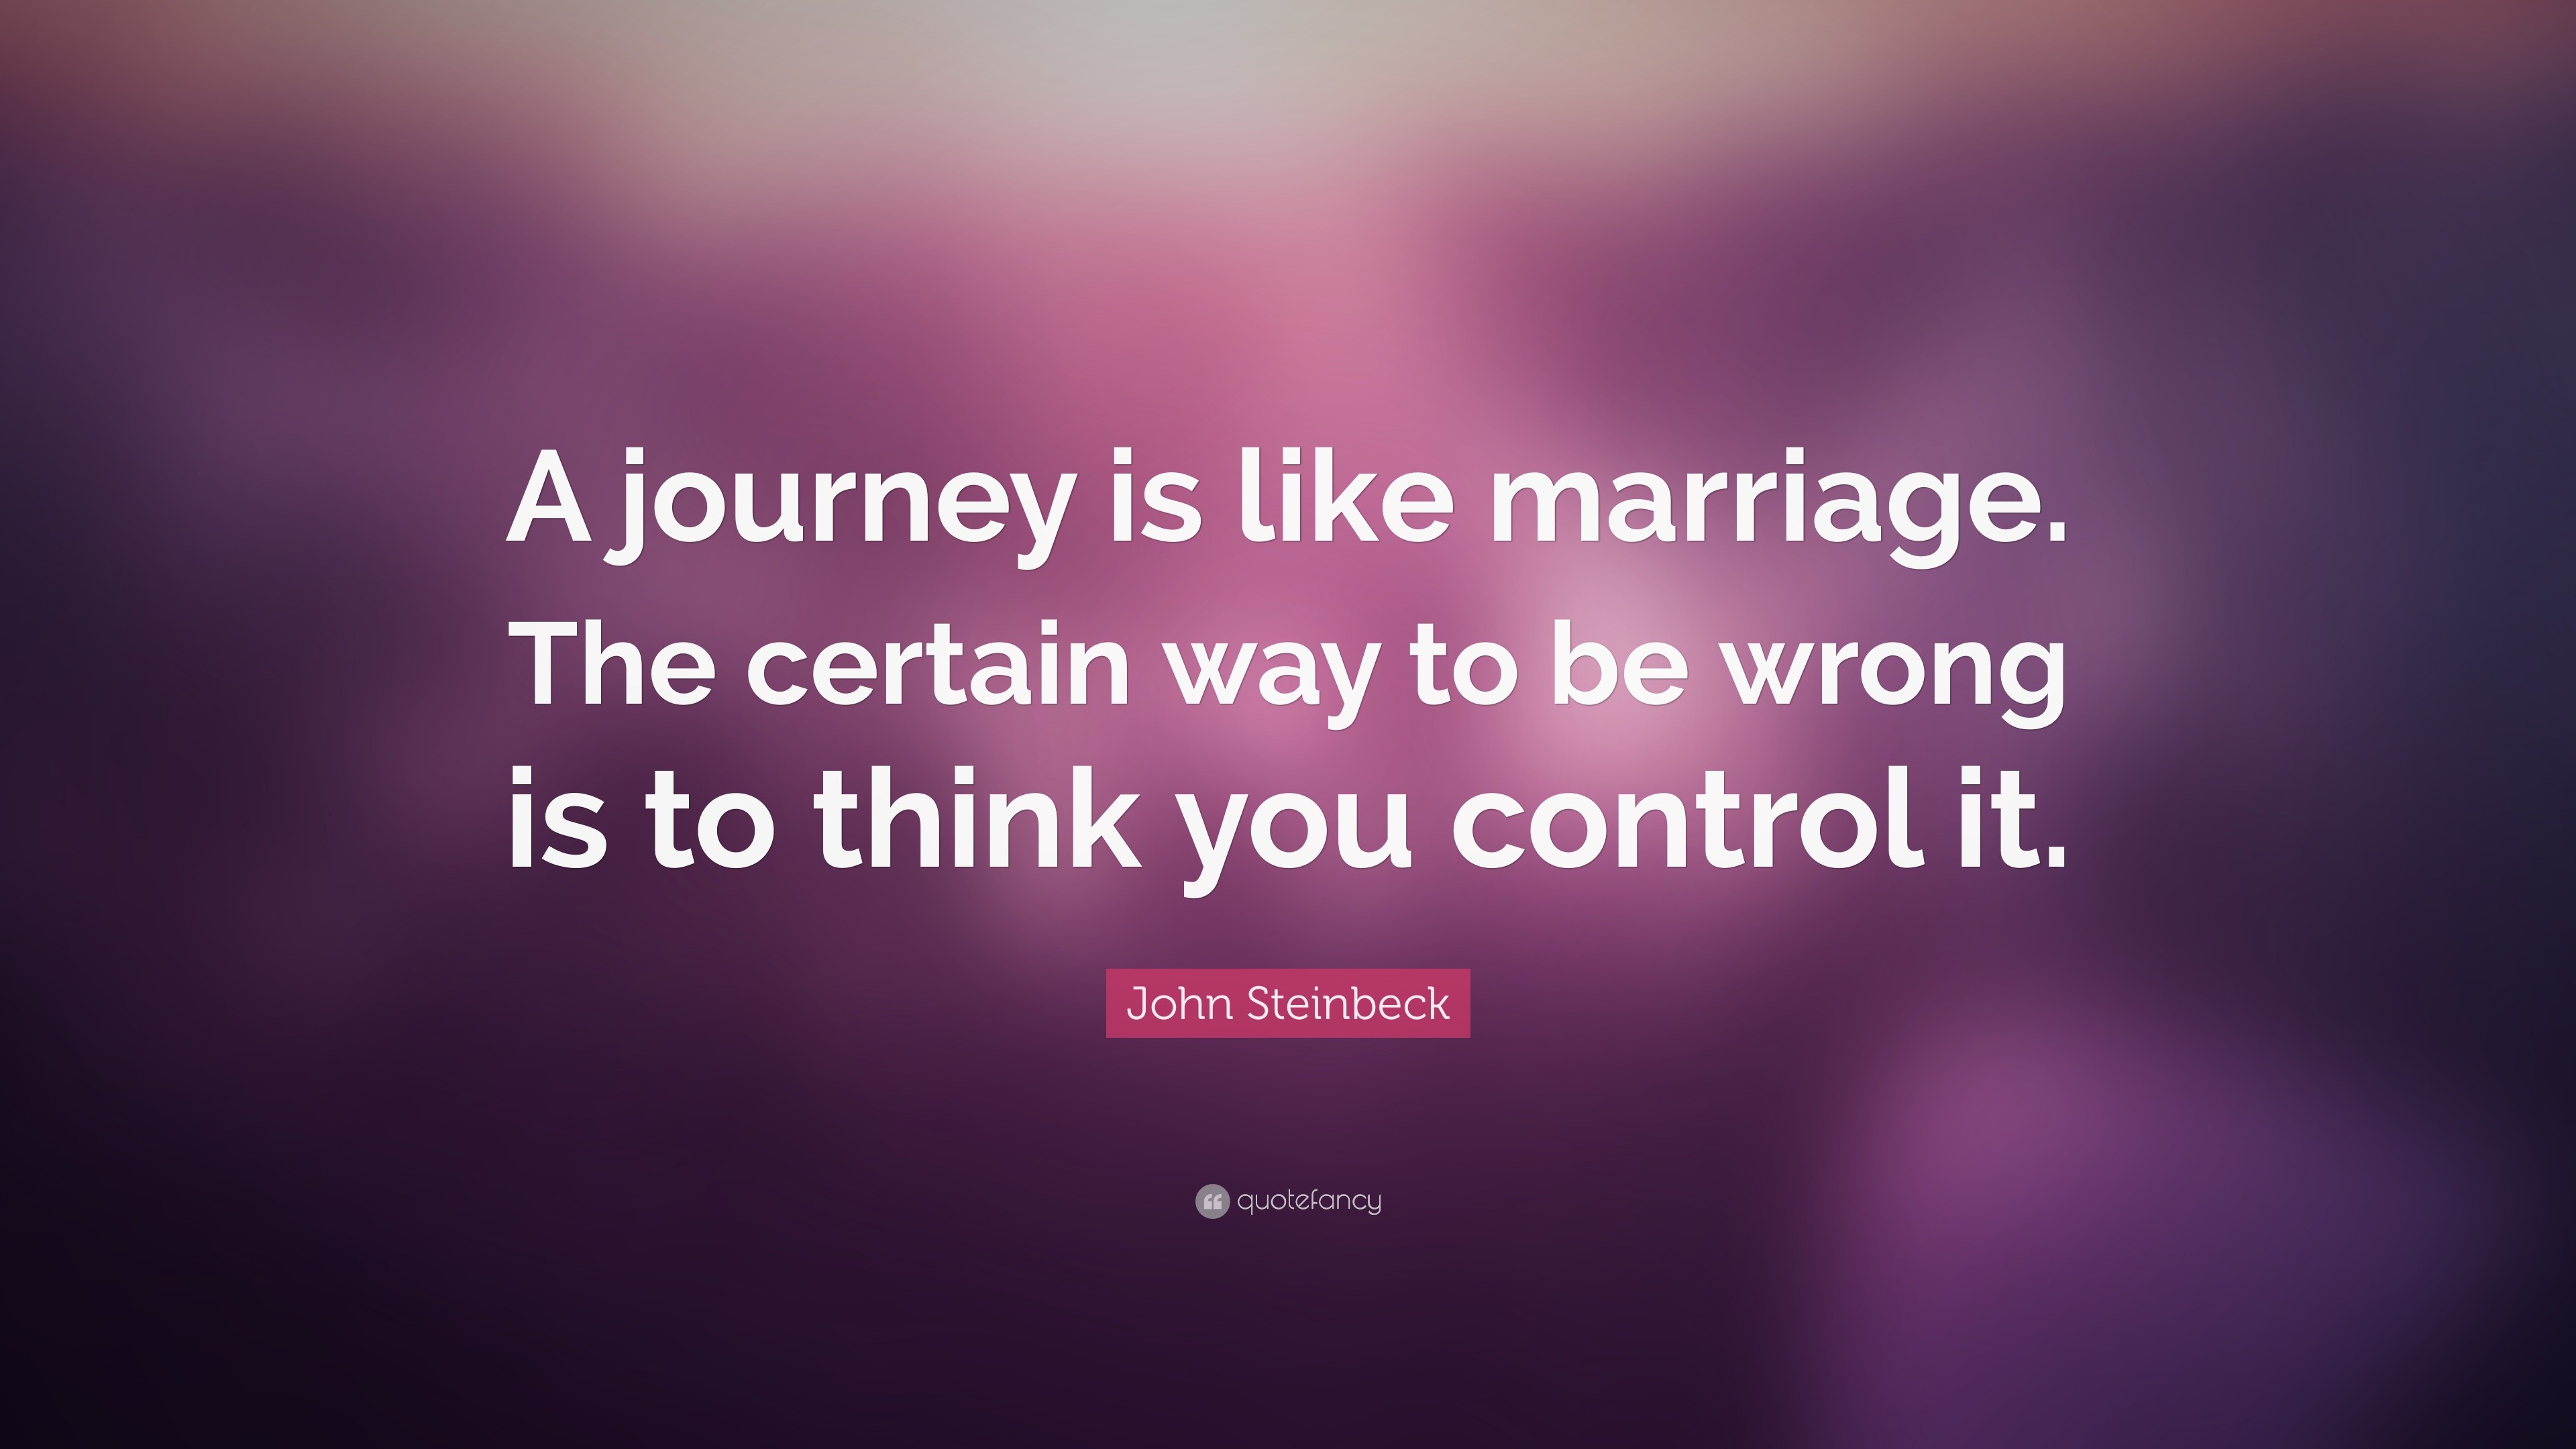 John Steinbeck Quote: “A journey is like marriage. The certain way to ...